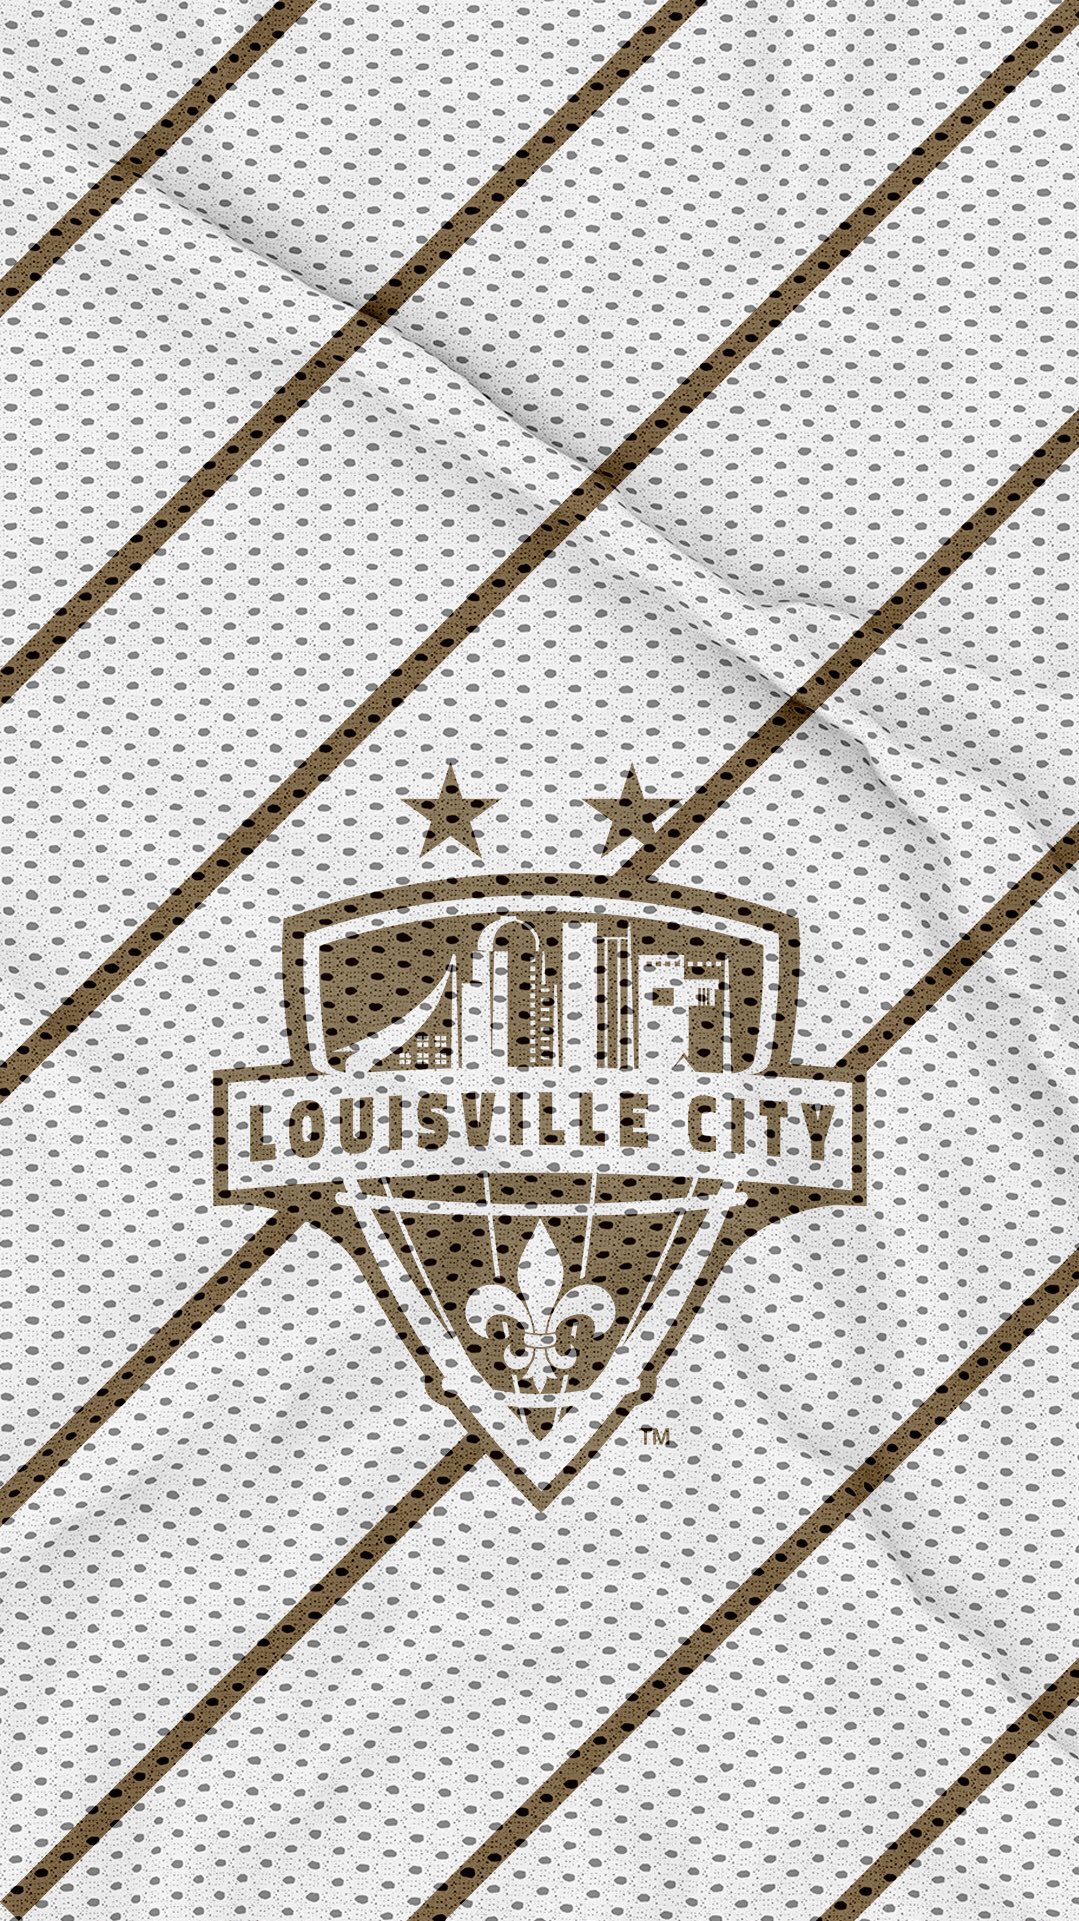 Louisville City FC New Phone Wallpaper Match Our New 2019 Kits. Here's Our Away Kit: White Gold